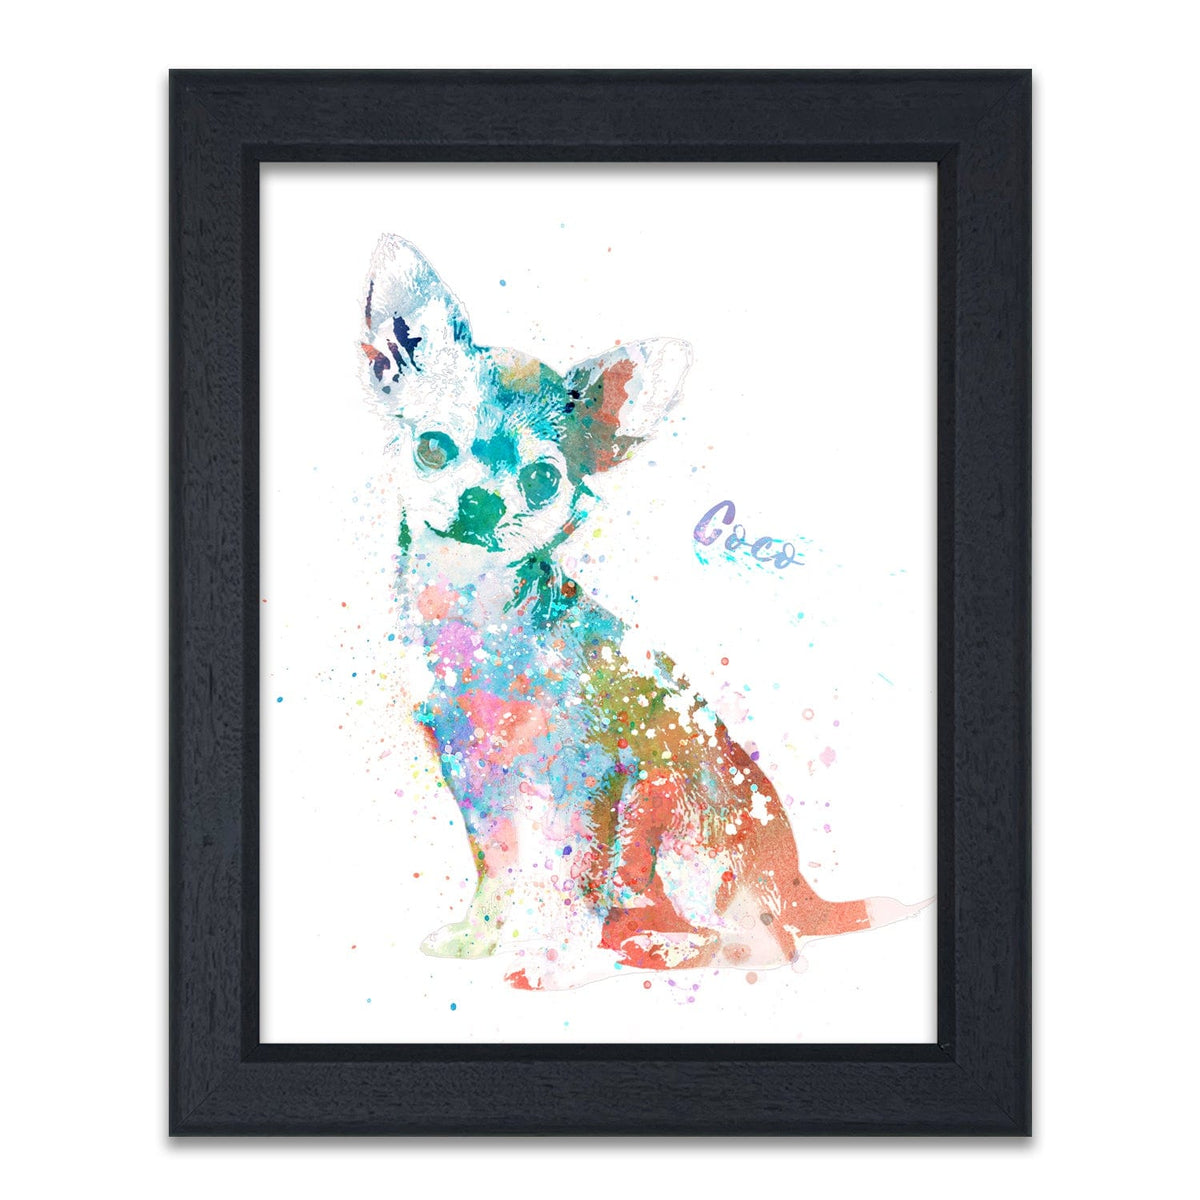 Framed Chihuahua art - Personalized pet dog gift